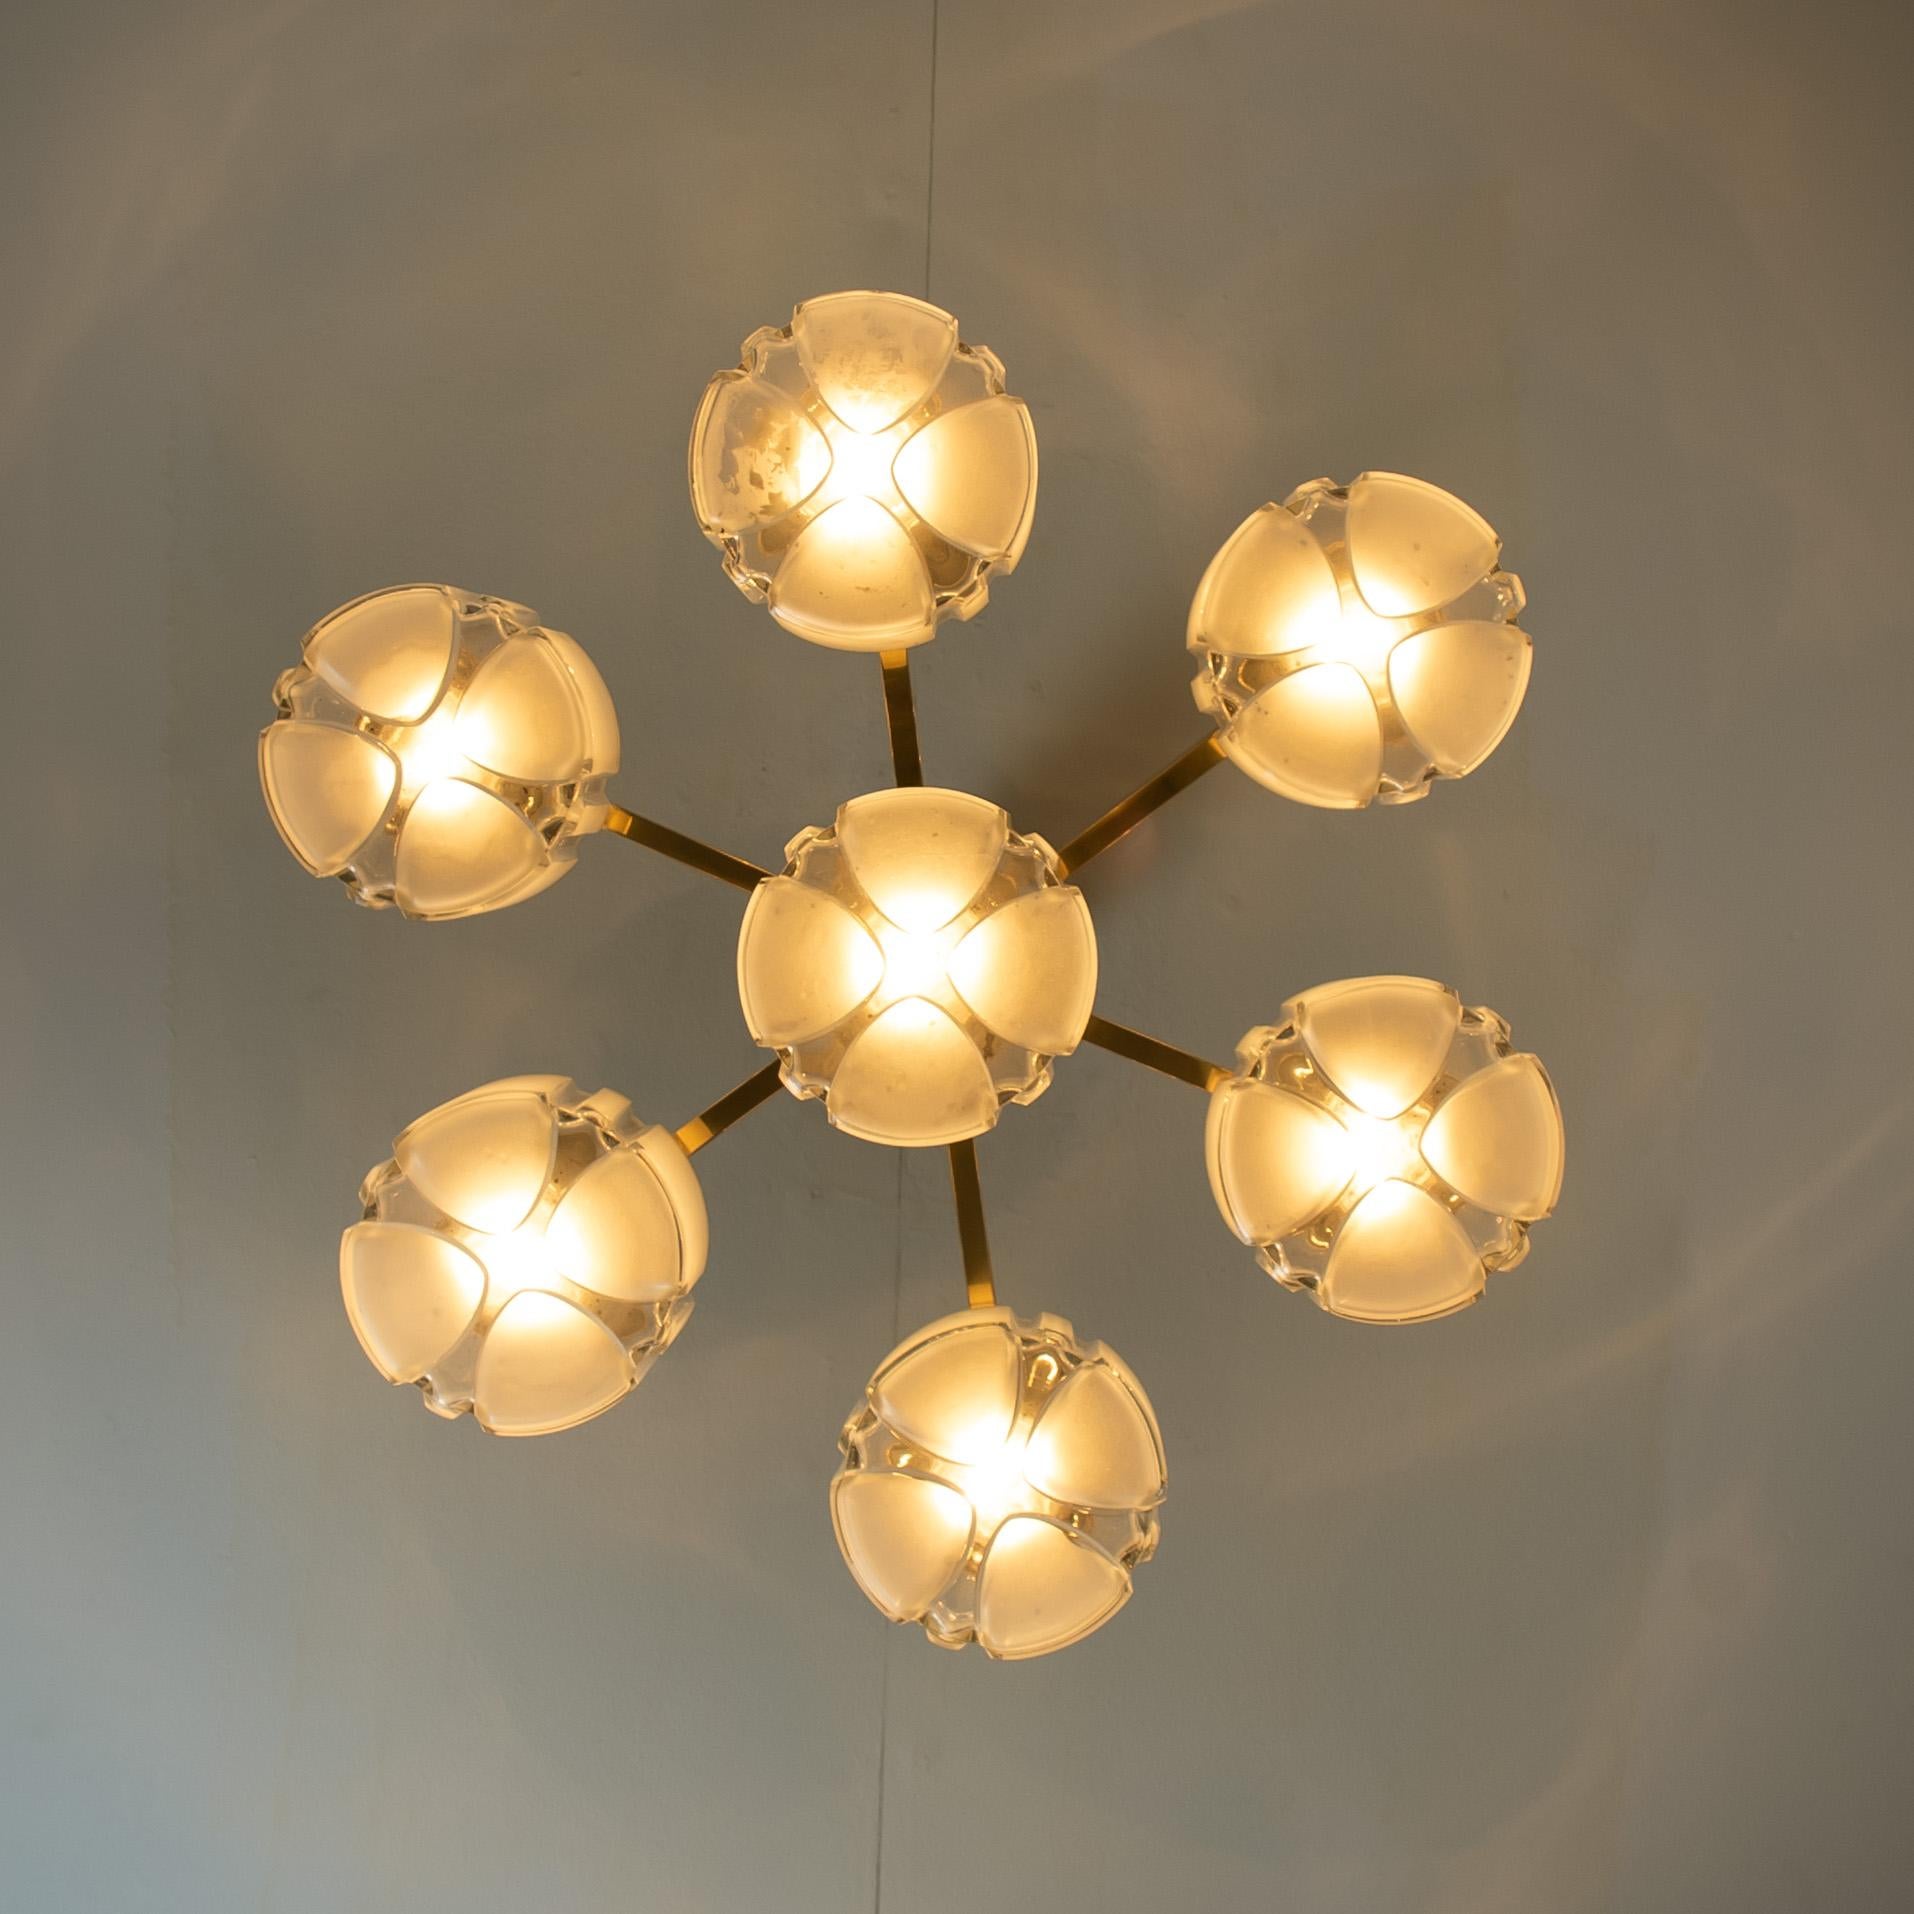 Hillebrand Chandelier Matt and Clear Glass Shades and Brass, circa 1970s Germany For Sale 8